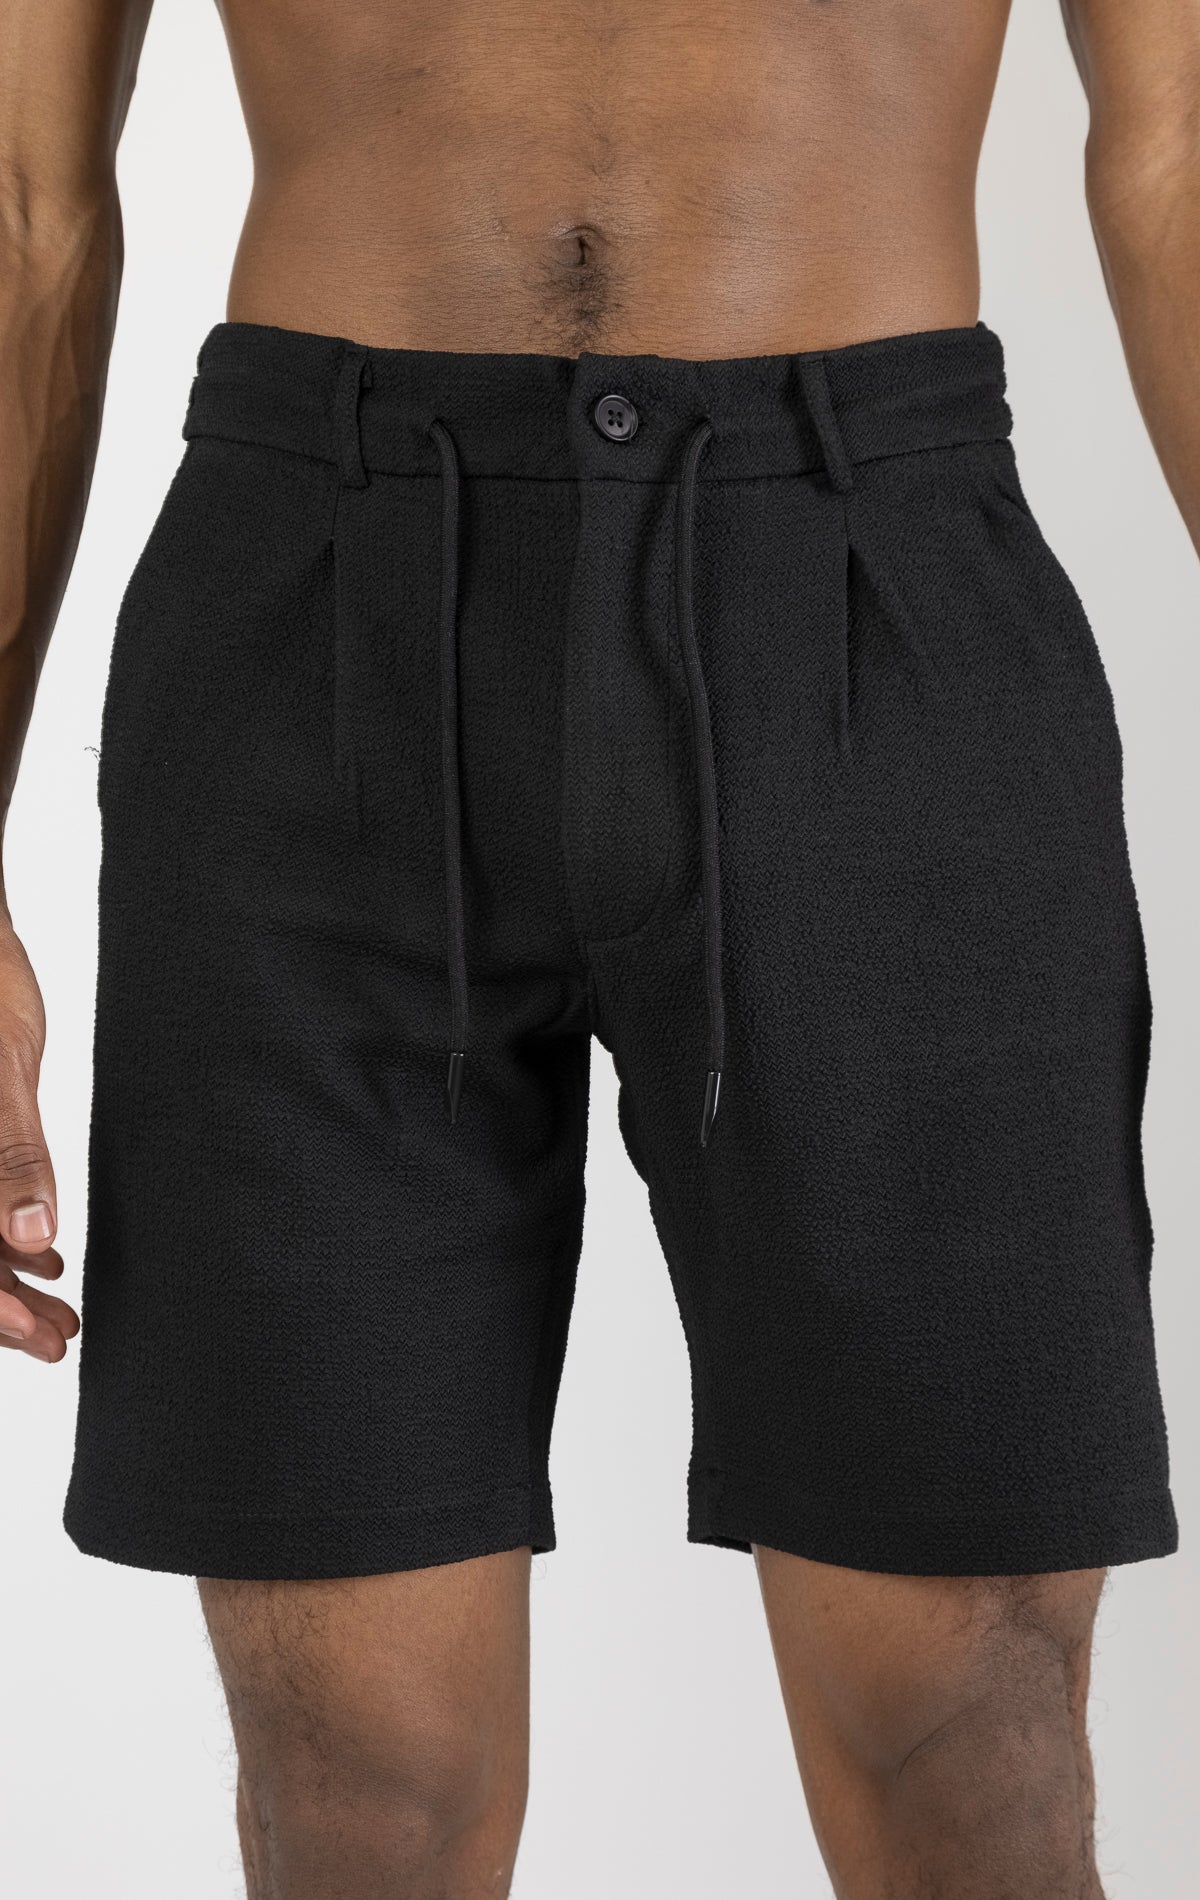 Men's elegant everyday shorts in black. The shorts are made from a blend of polyester (74%), viscose (24%), and elastane (2%) and feature a tailored fit and a versatile length.